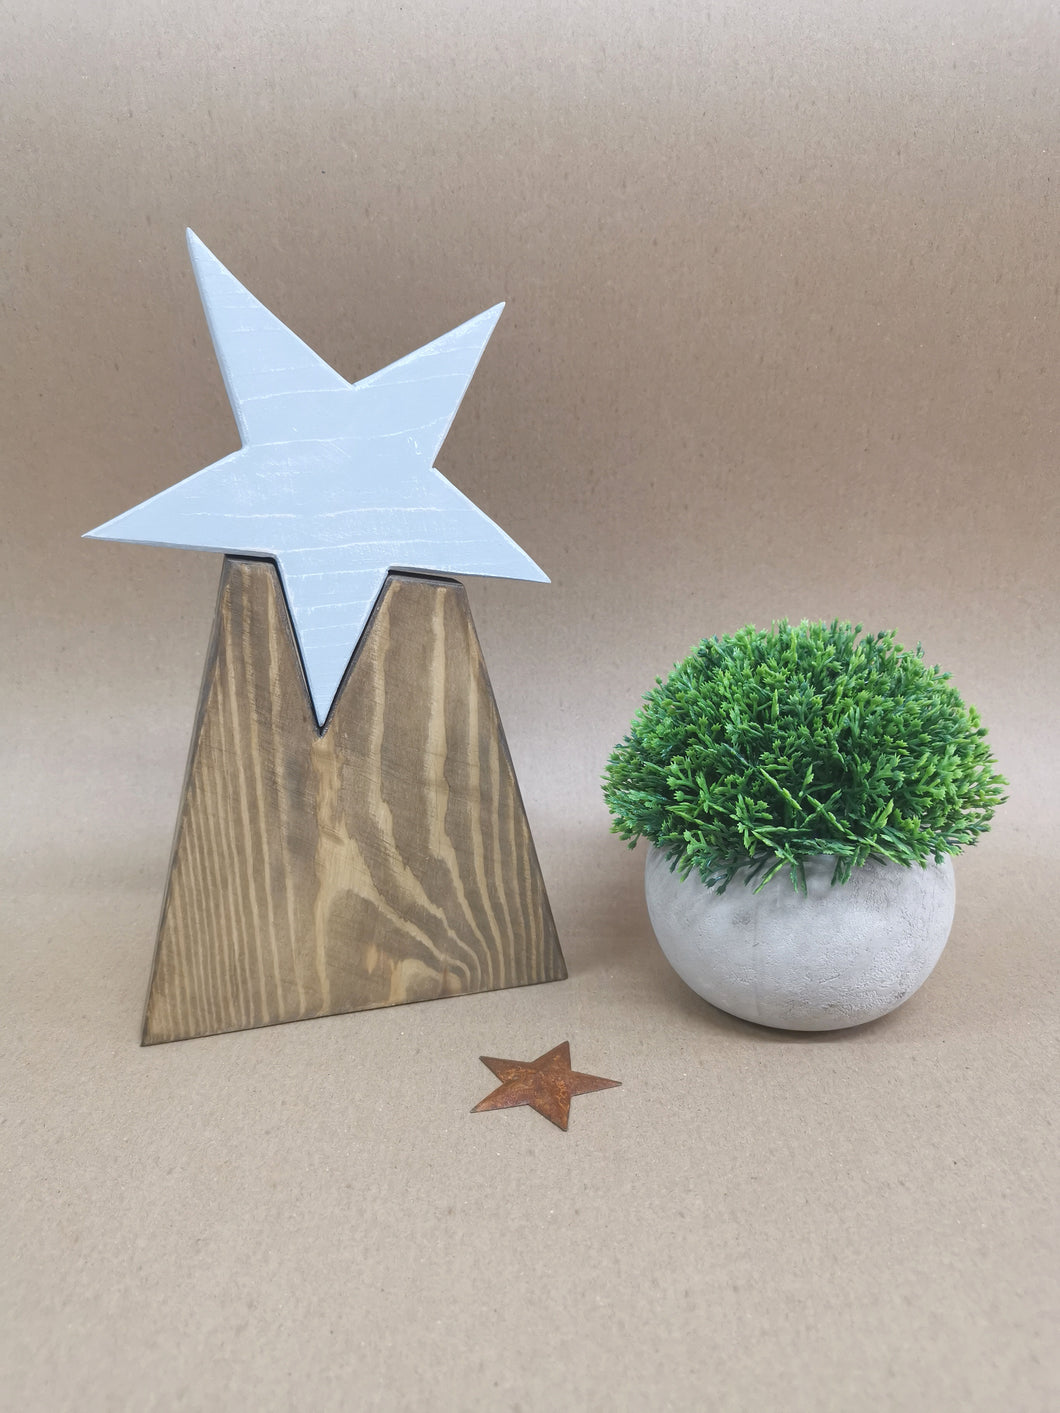 Star on wooden base